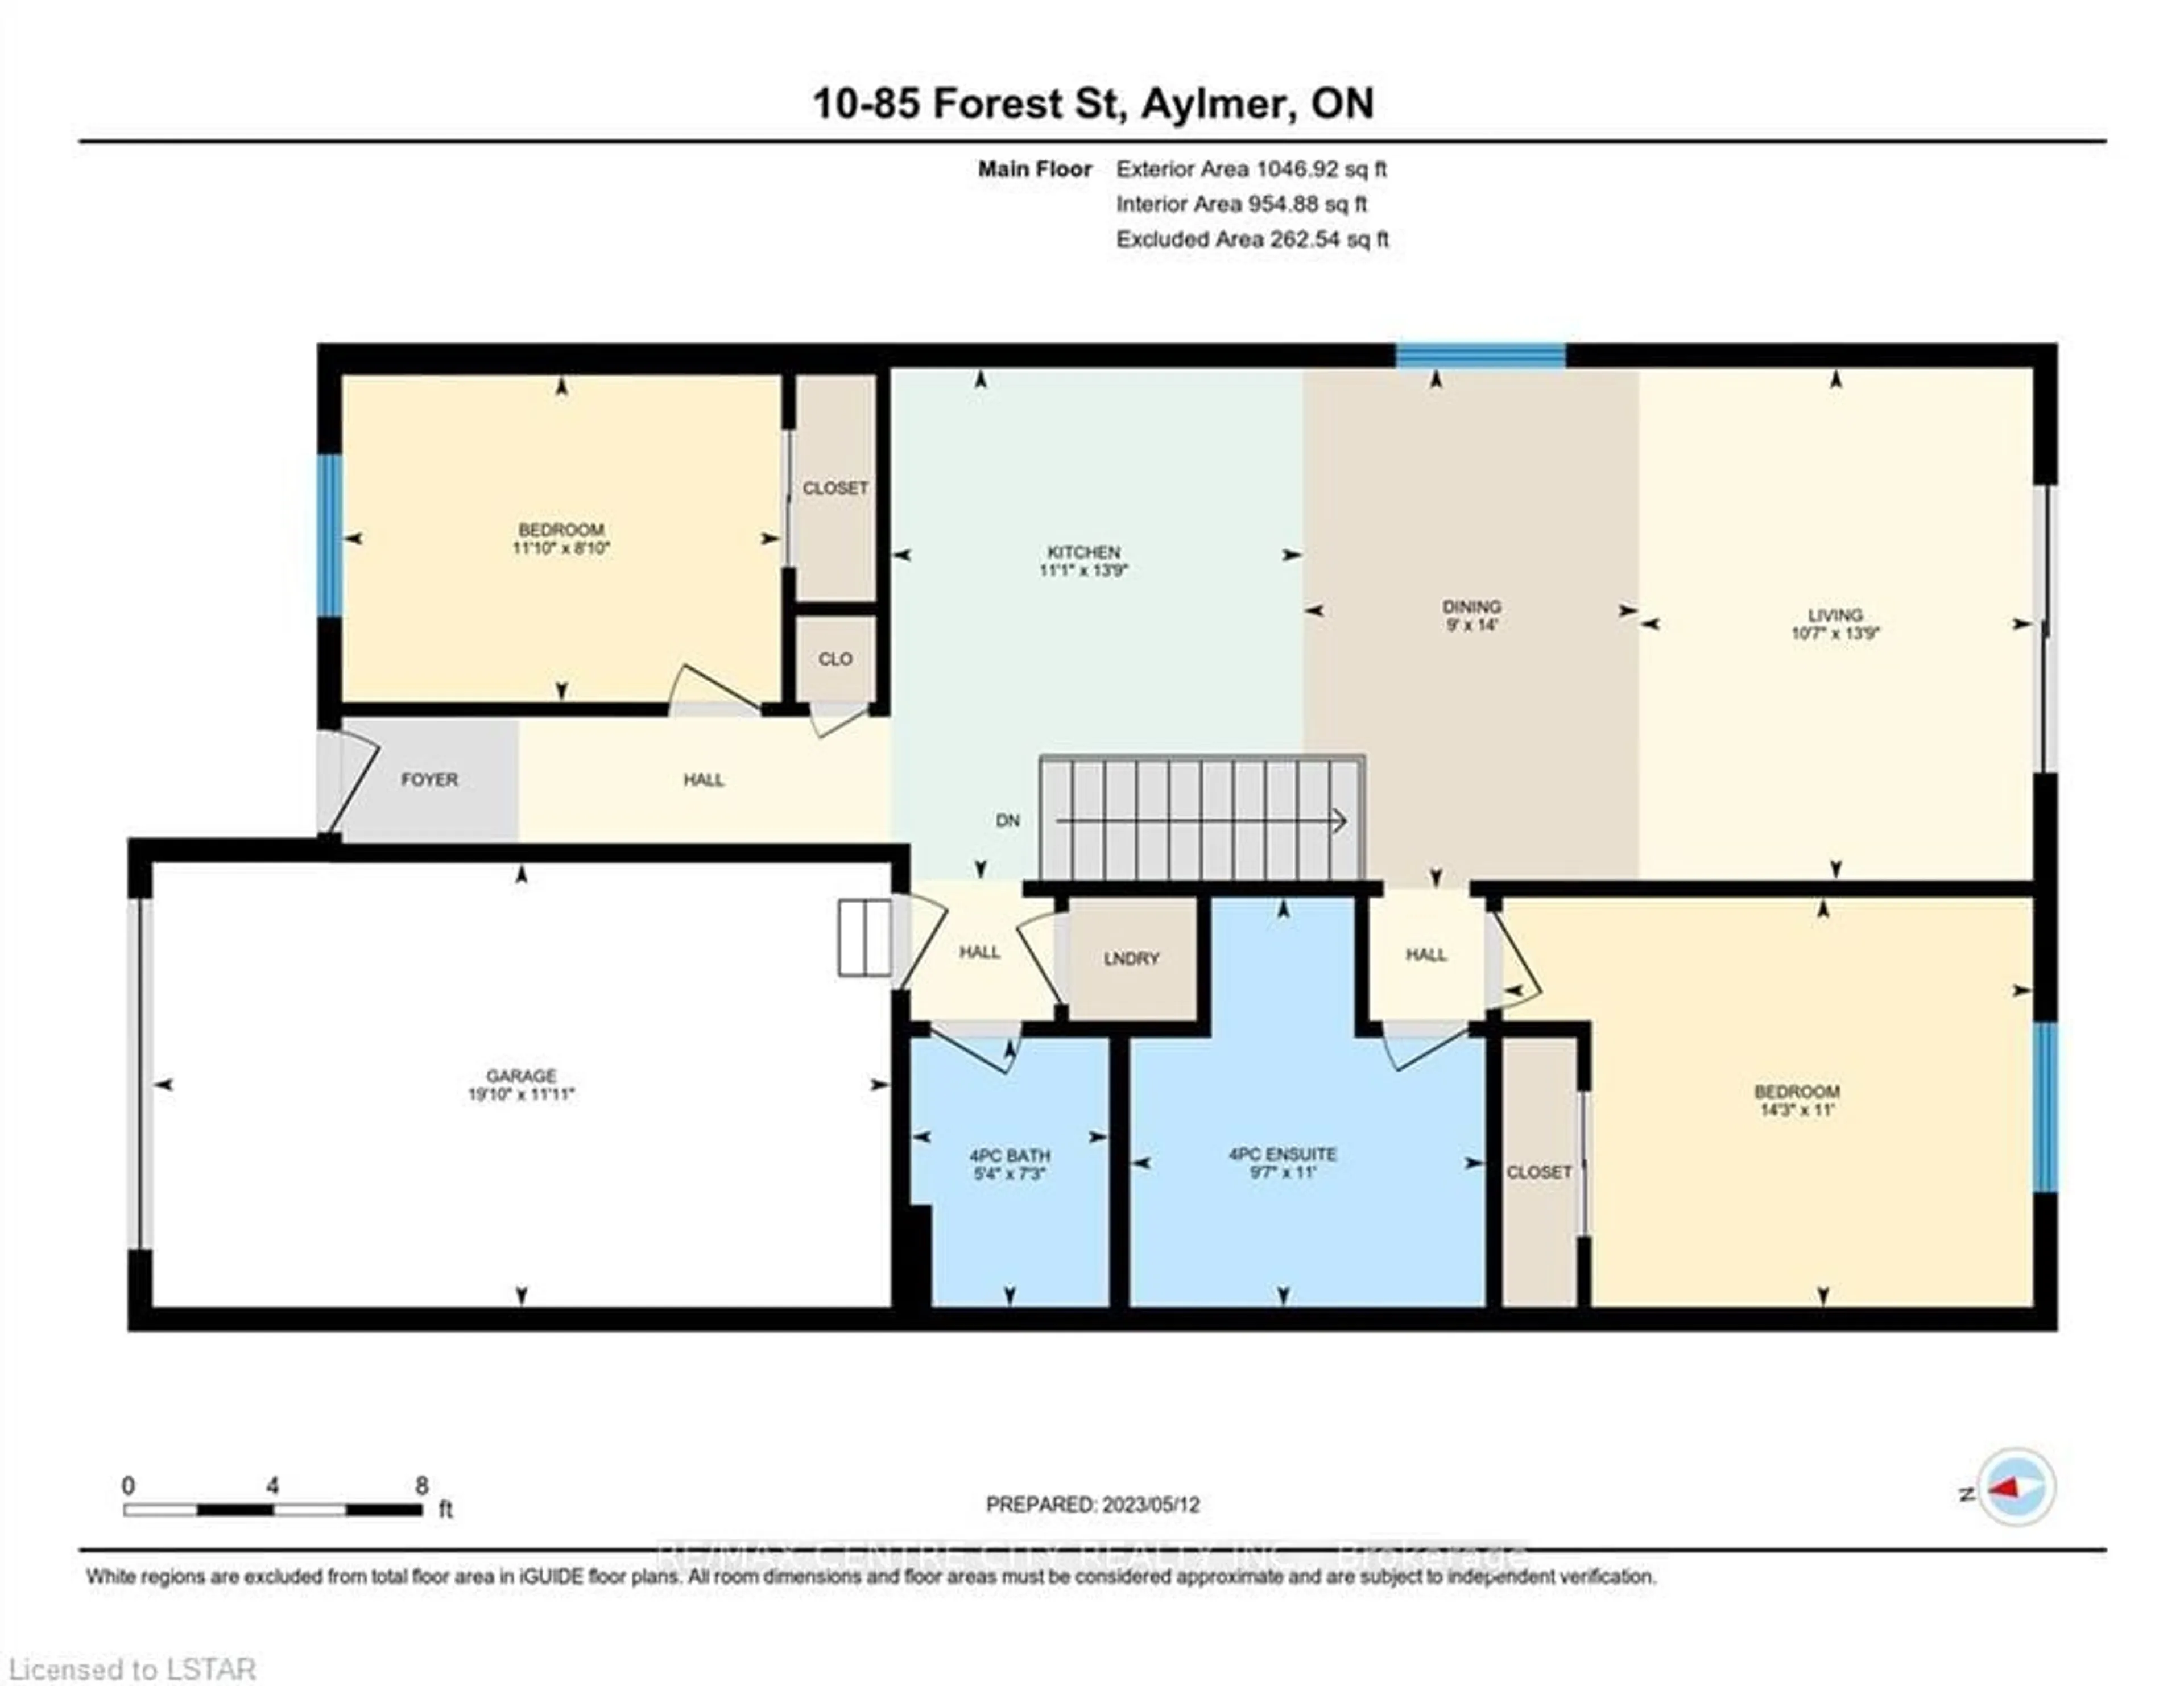 Floor plan for 85 Forest St #8, Aylmer Ontario N5H 1A5